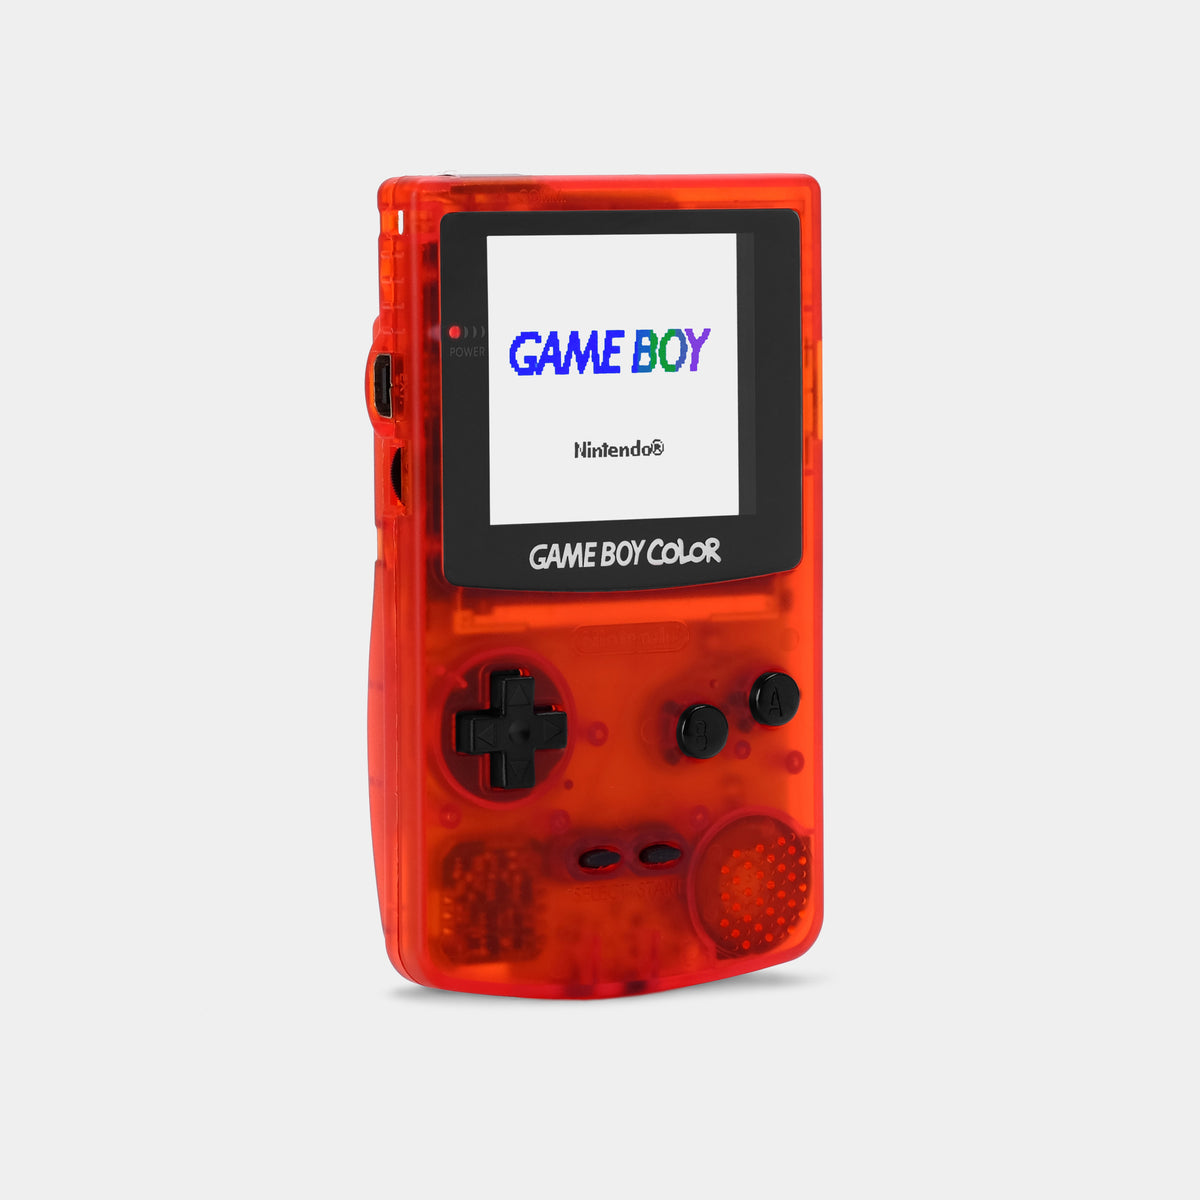 Game Boy Color - Clear (Renewed)